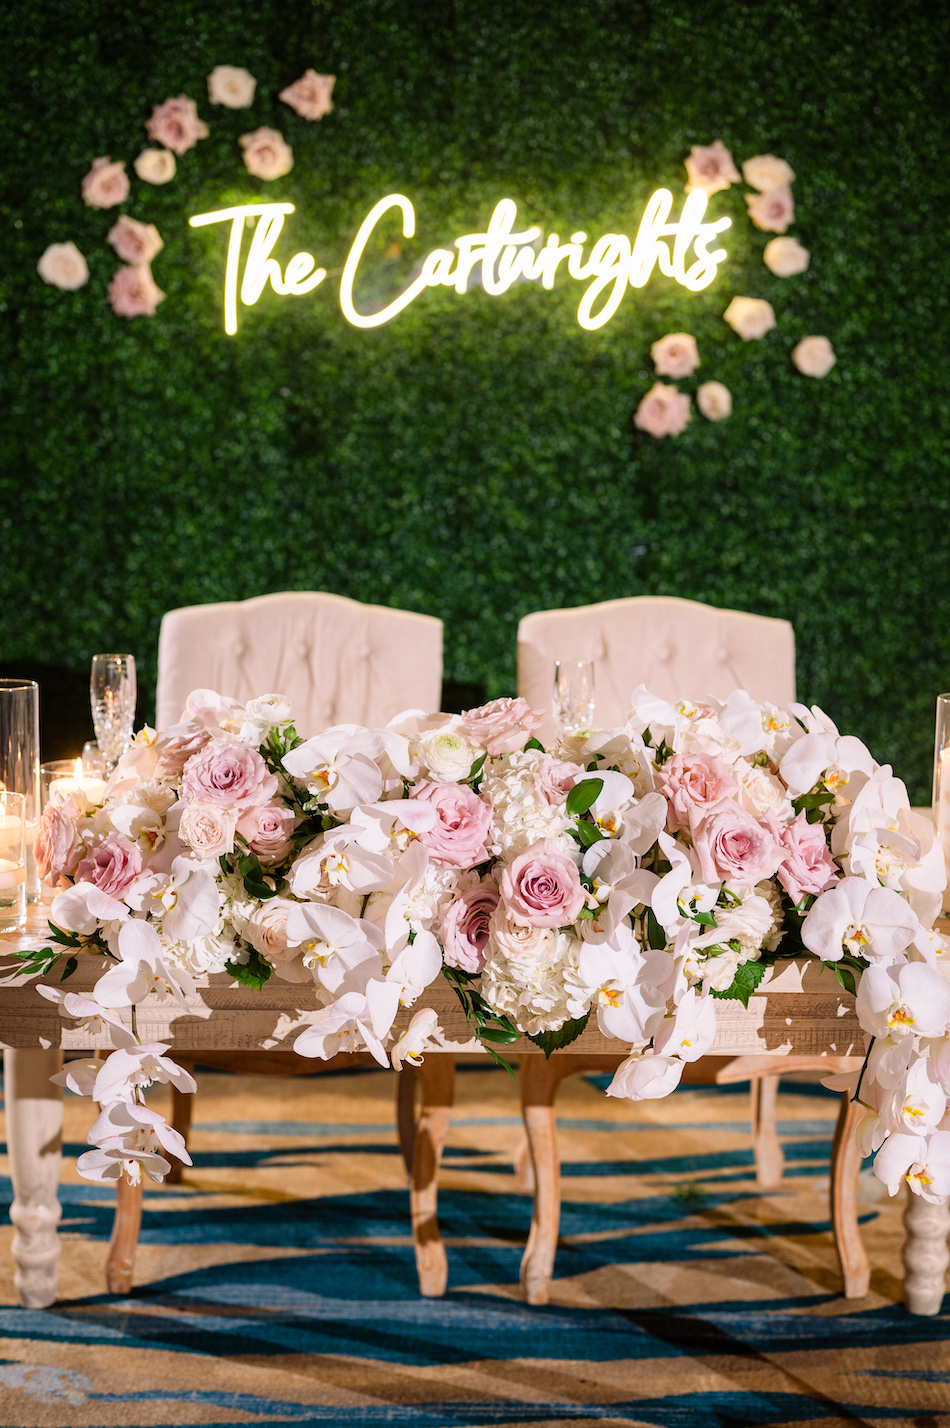 sweetheart table, blush florals, blush sweetheart table, floral design, florist, wedding florist, wedding flowers, orange county weddings, orange county wedding florist, orange county florist, orange county floral design, flowers by cina